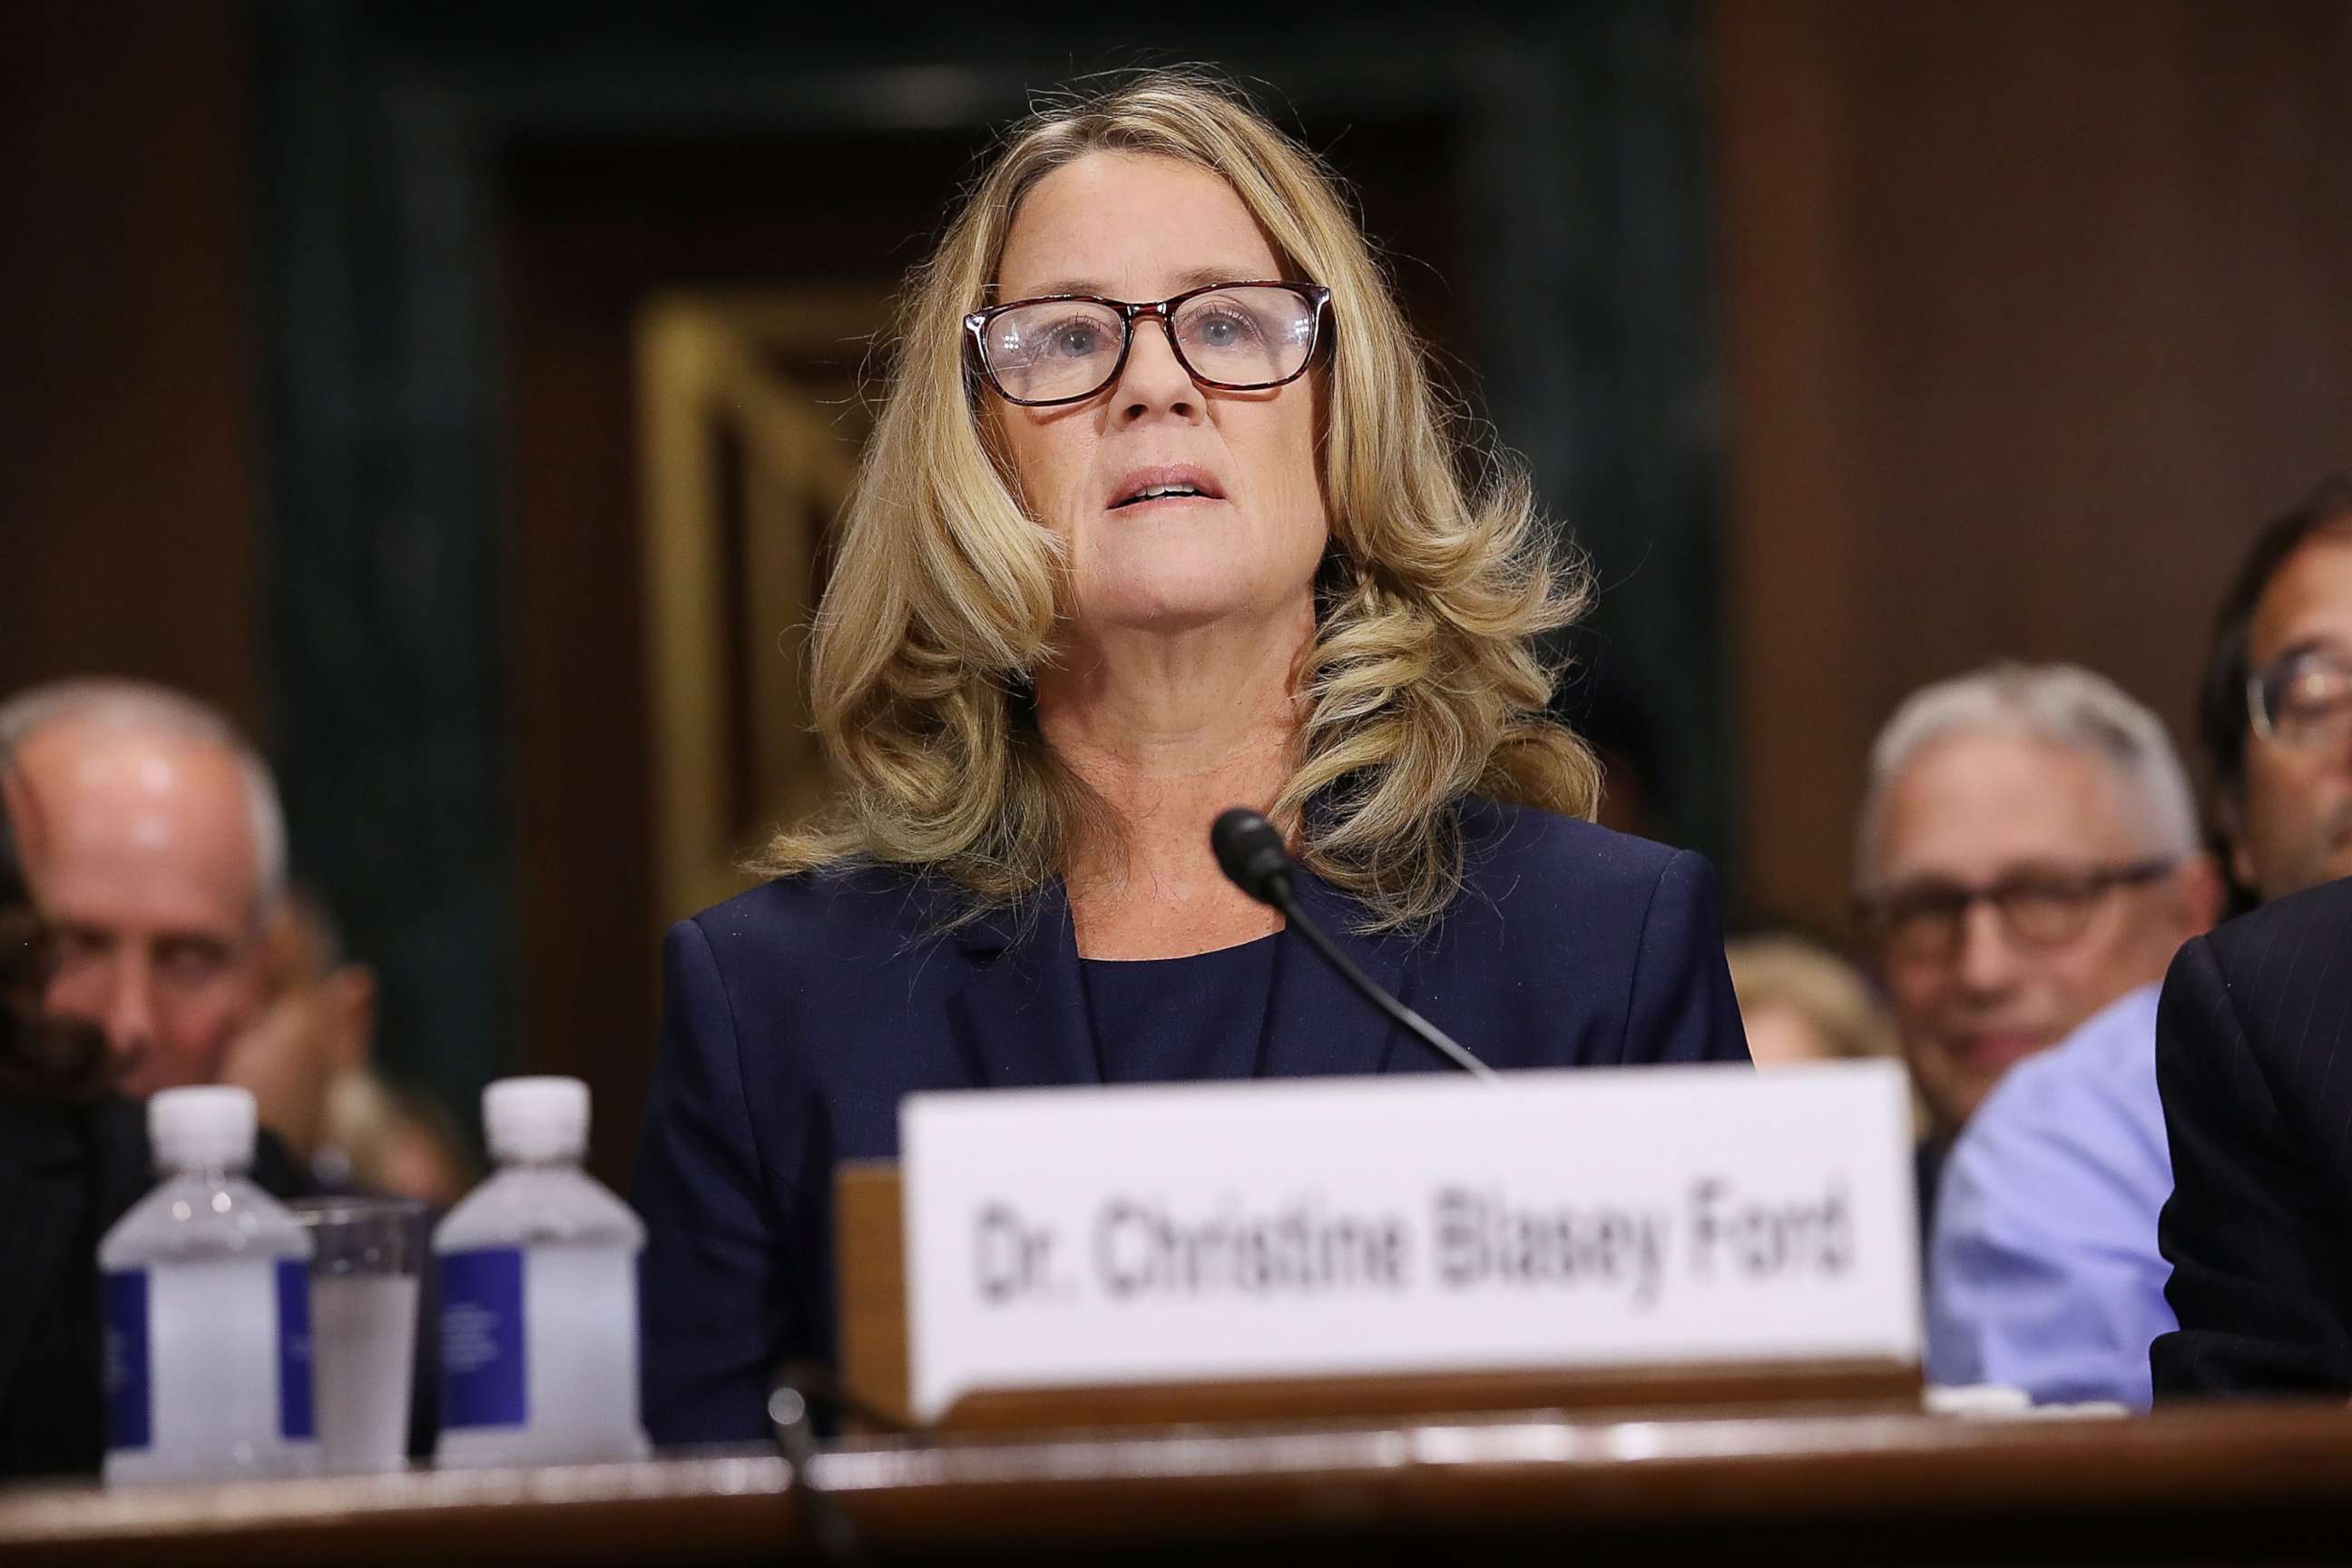 PHOTO: Christine Blasey Ford prepares to testify before the Senate Judiciary Committee in the Dirksen Senate Office Building on Capitol Hill, Sept. 27, 2018 in Washington.